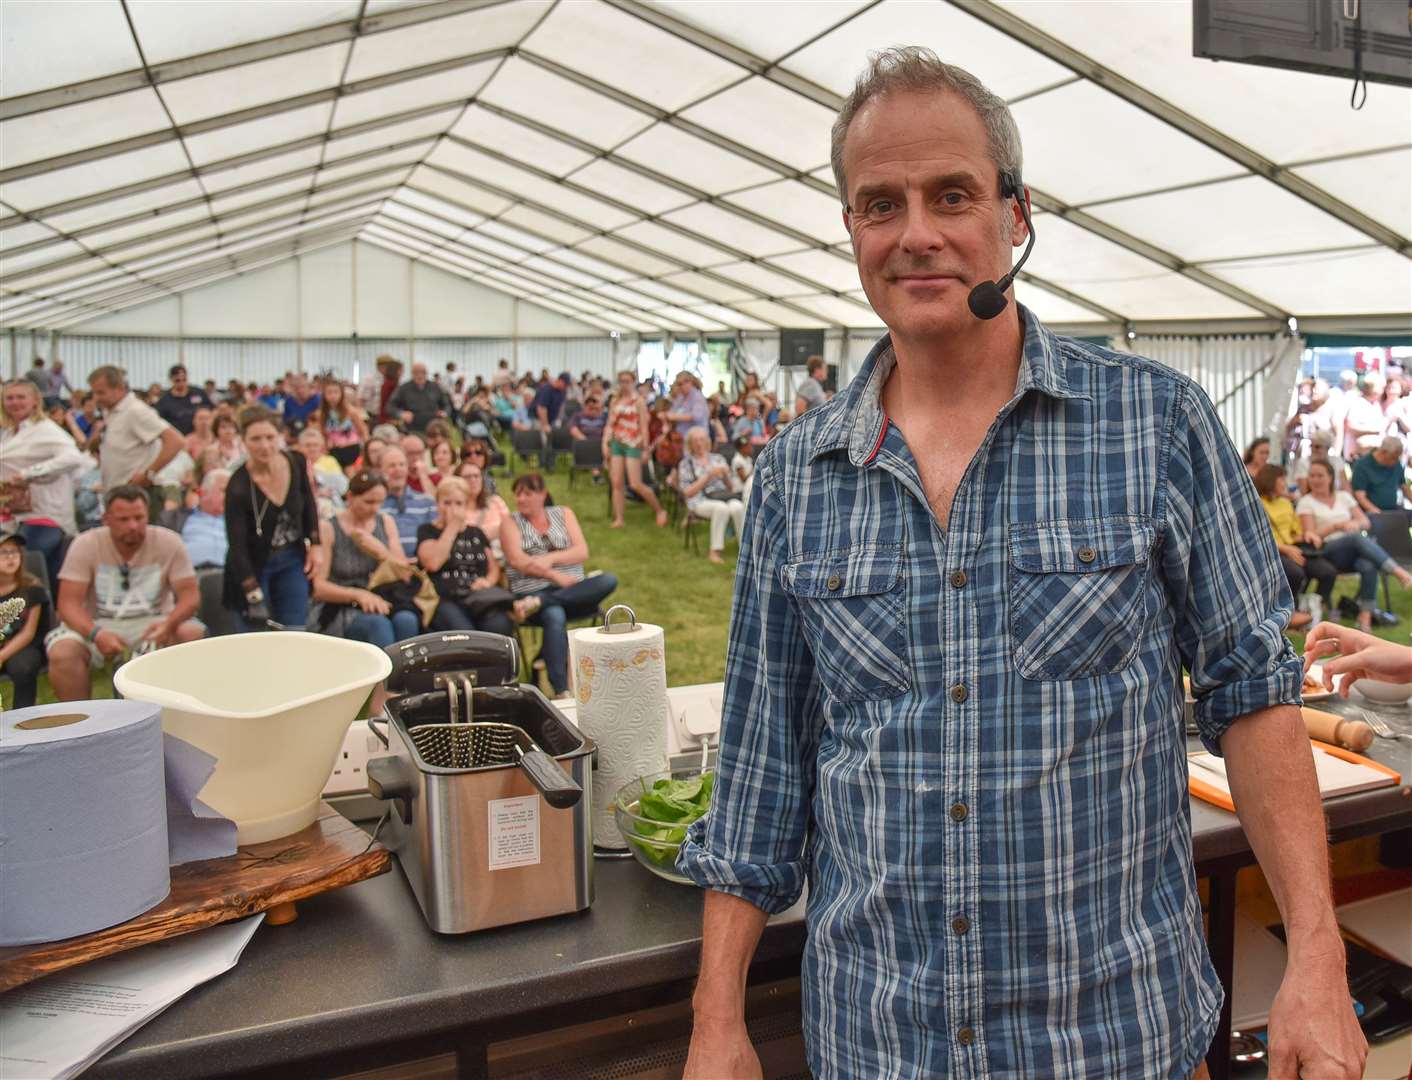 Phil Vickery, pictured at the Rutland Food and Craft Fair, has announced his separation to Fern Britton